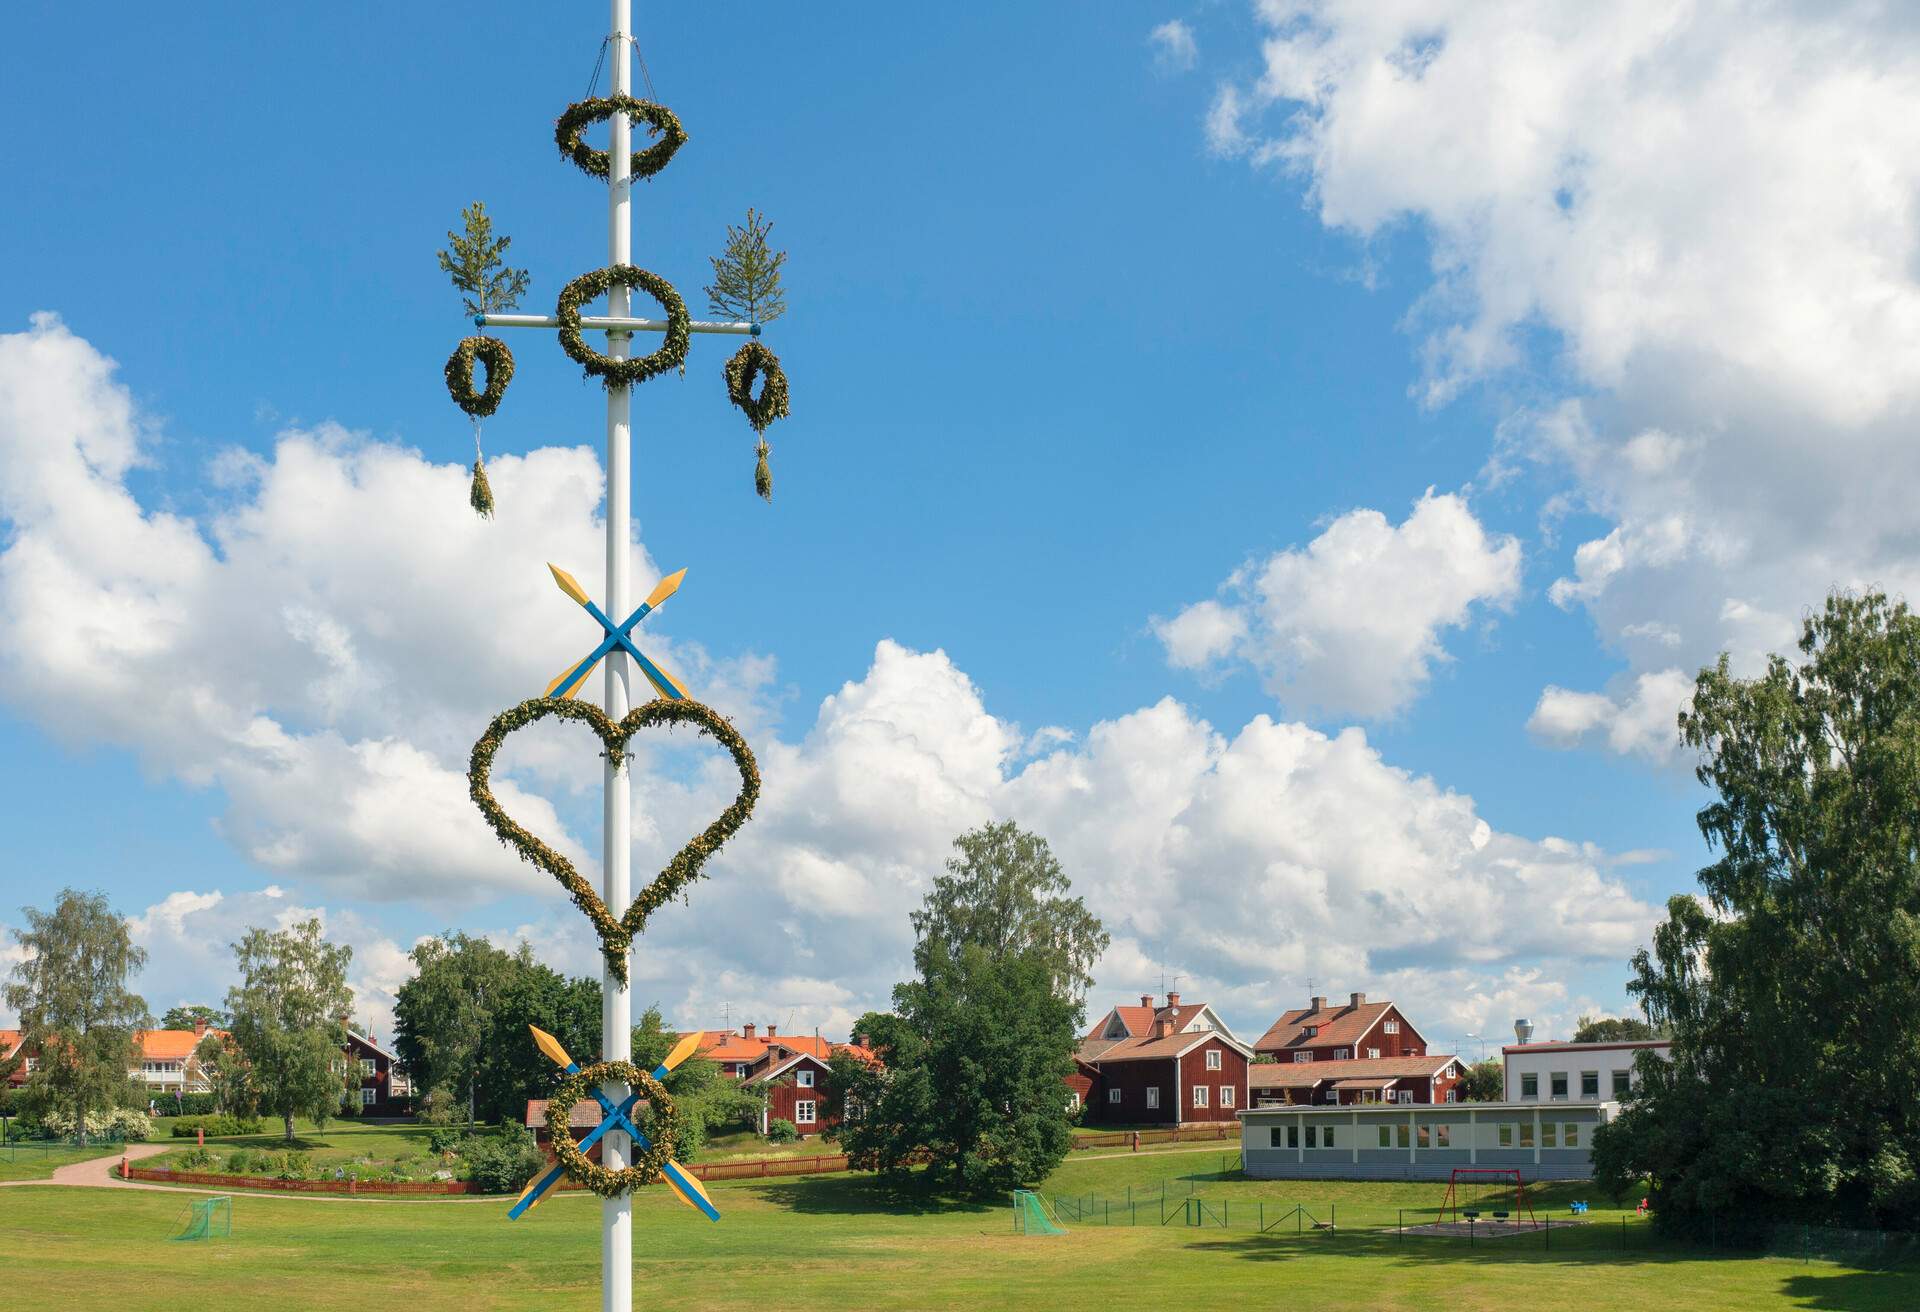 A traditional maypole for the summer solstice celebration in Leksand in the Dalarna region of Sweden.